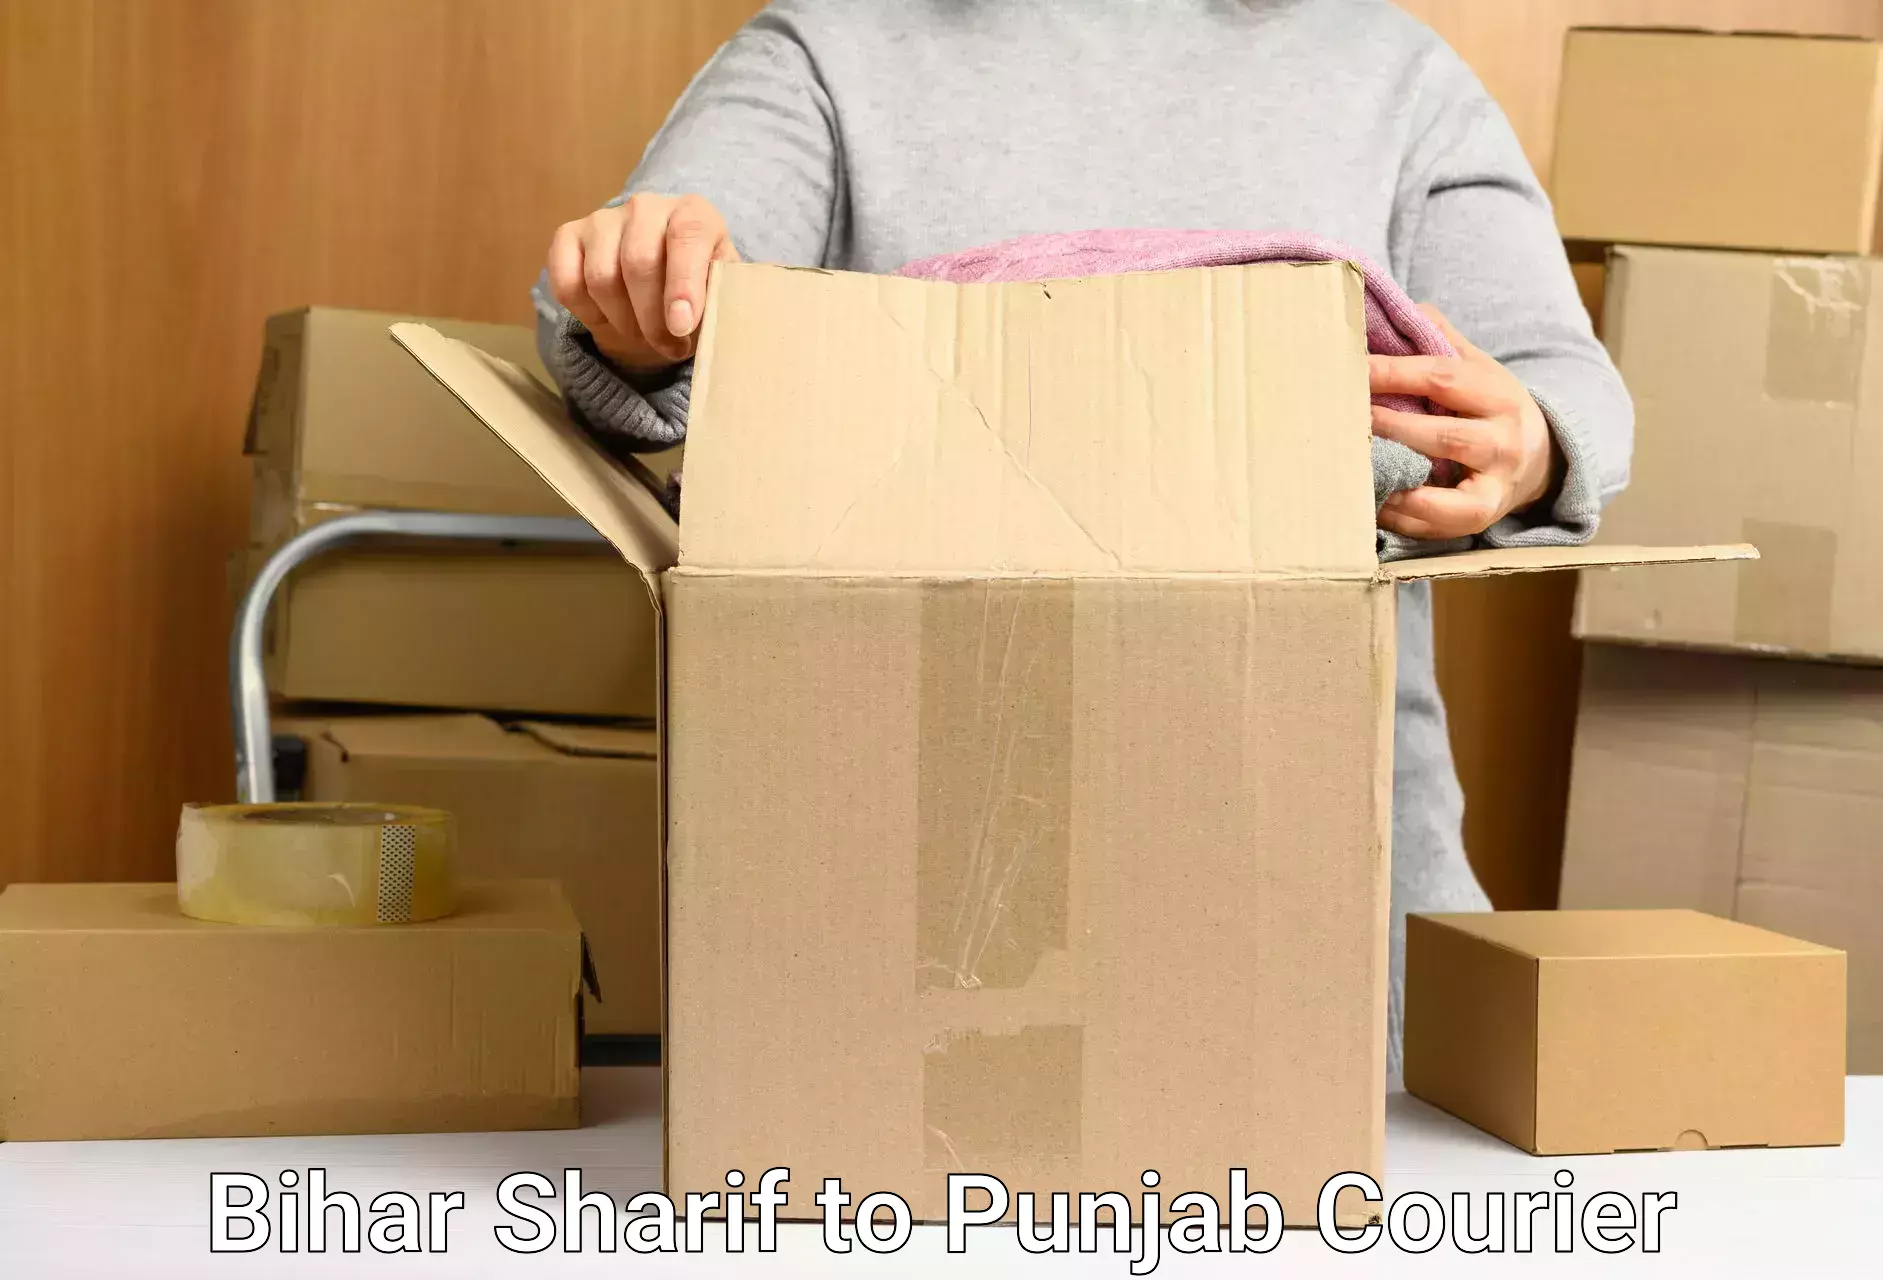 Customer-friendly courier services Bihar Sharif to Pathankot